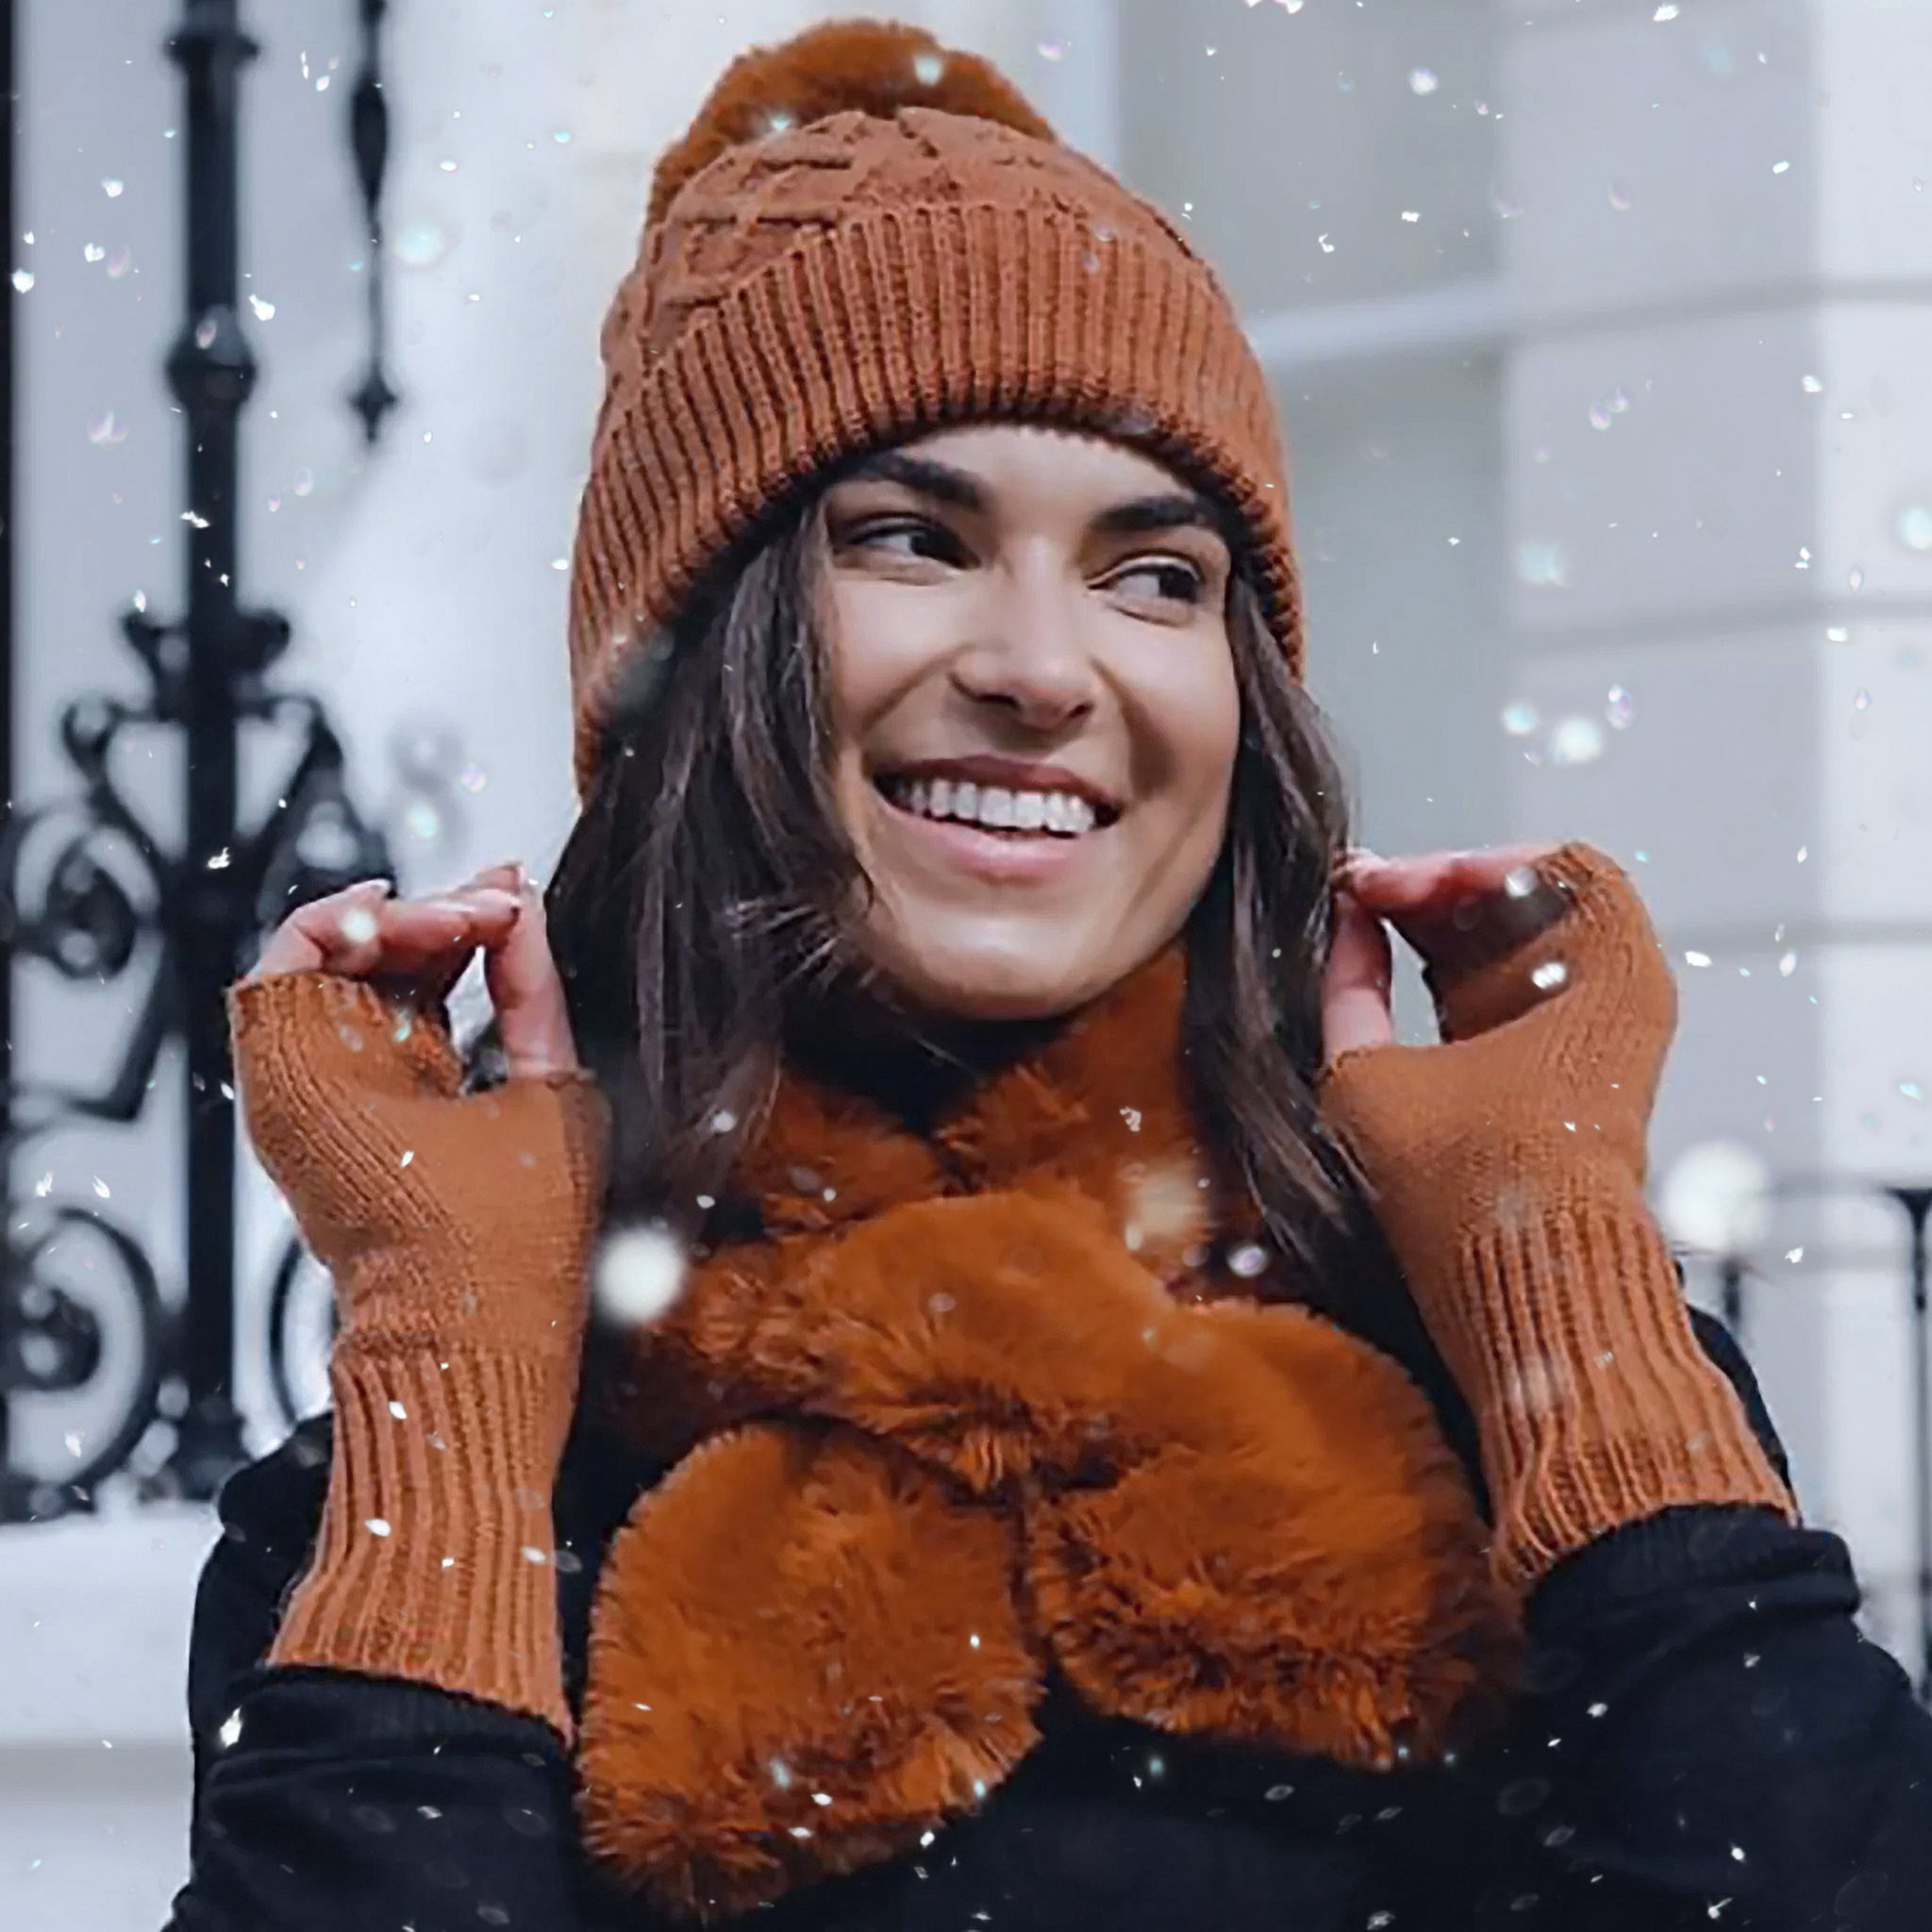 Model wearing nutmeg brown pompom coloured hat, fingerless gloves, and faux fur scarf under snowfall